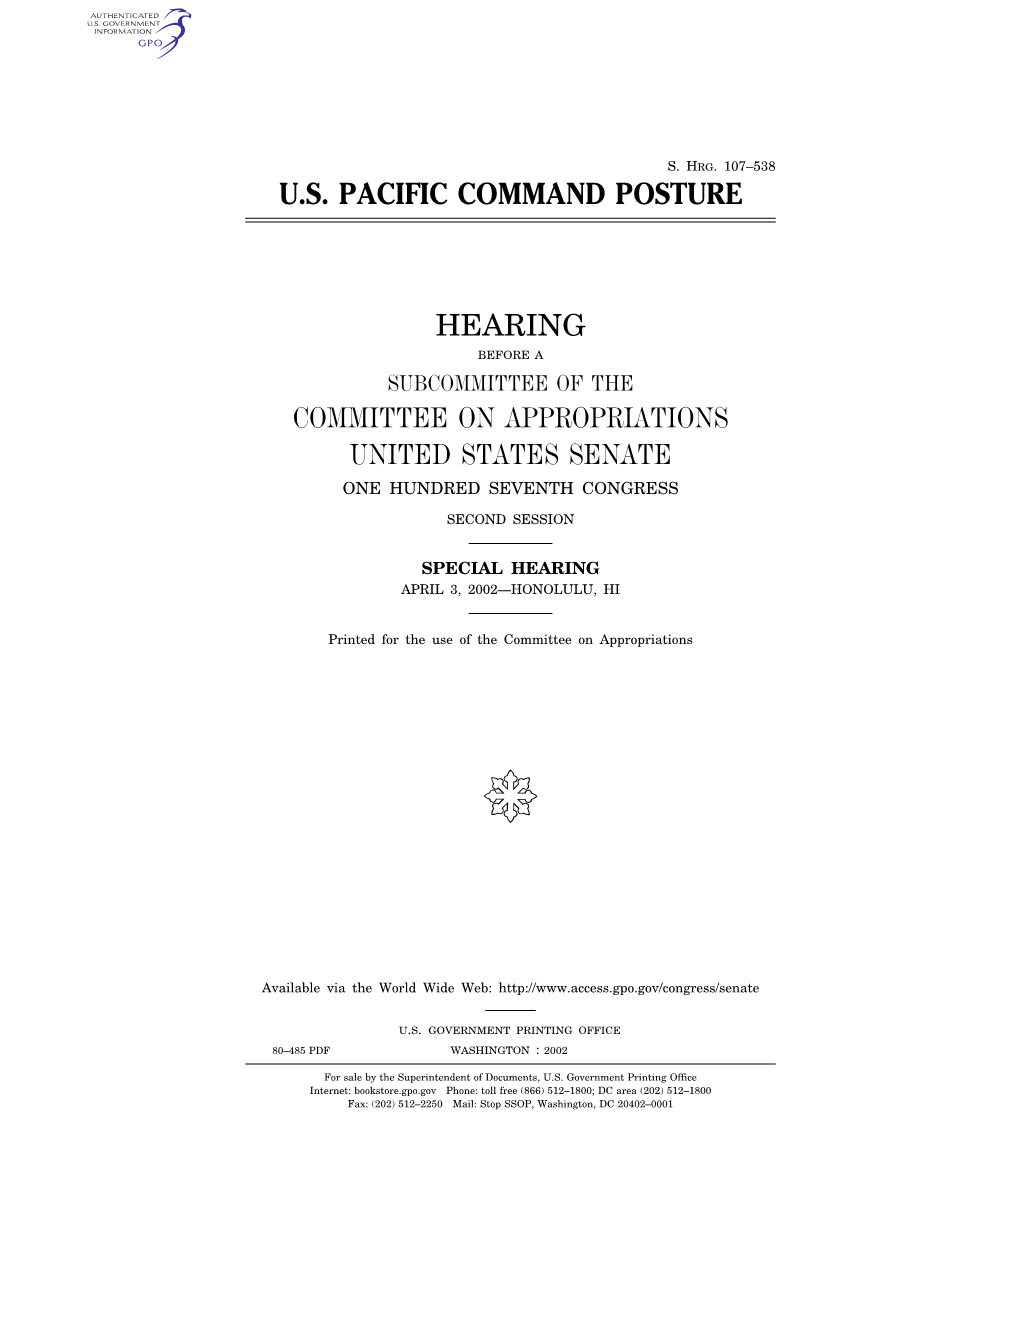 U.S. Pacific Command Posture Hearing Committee On